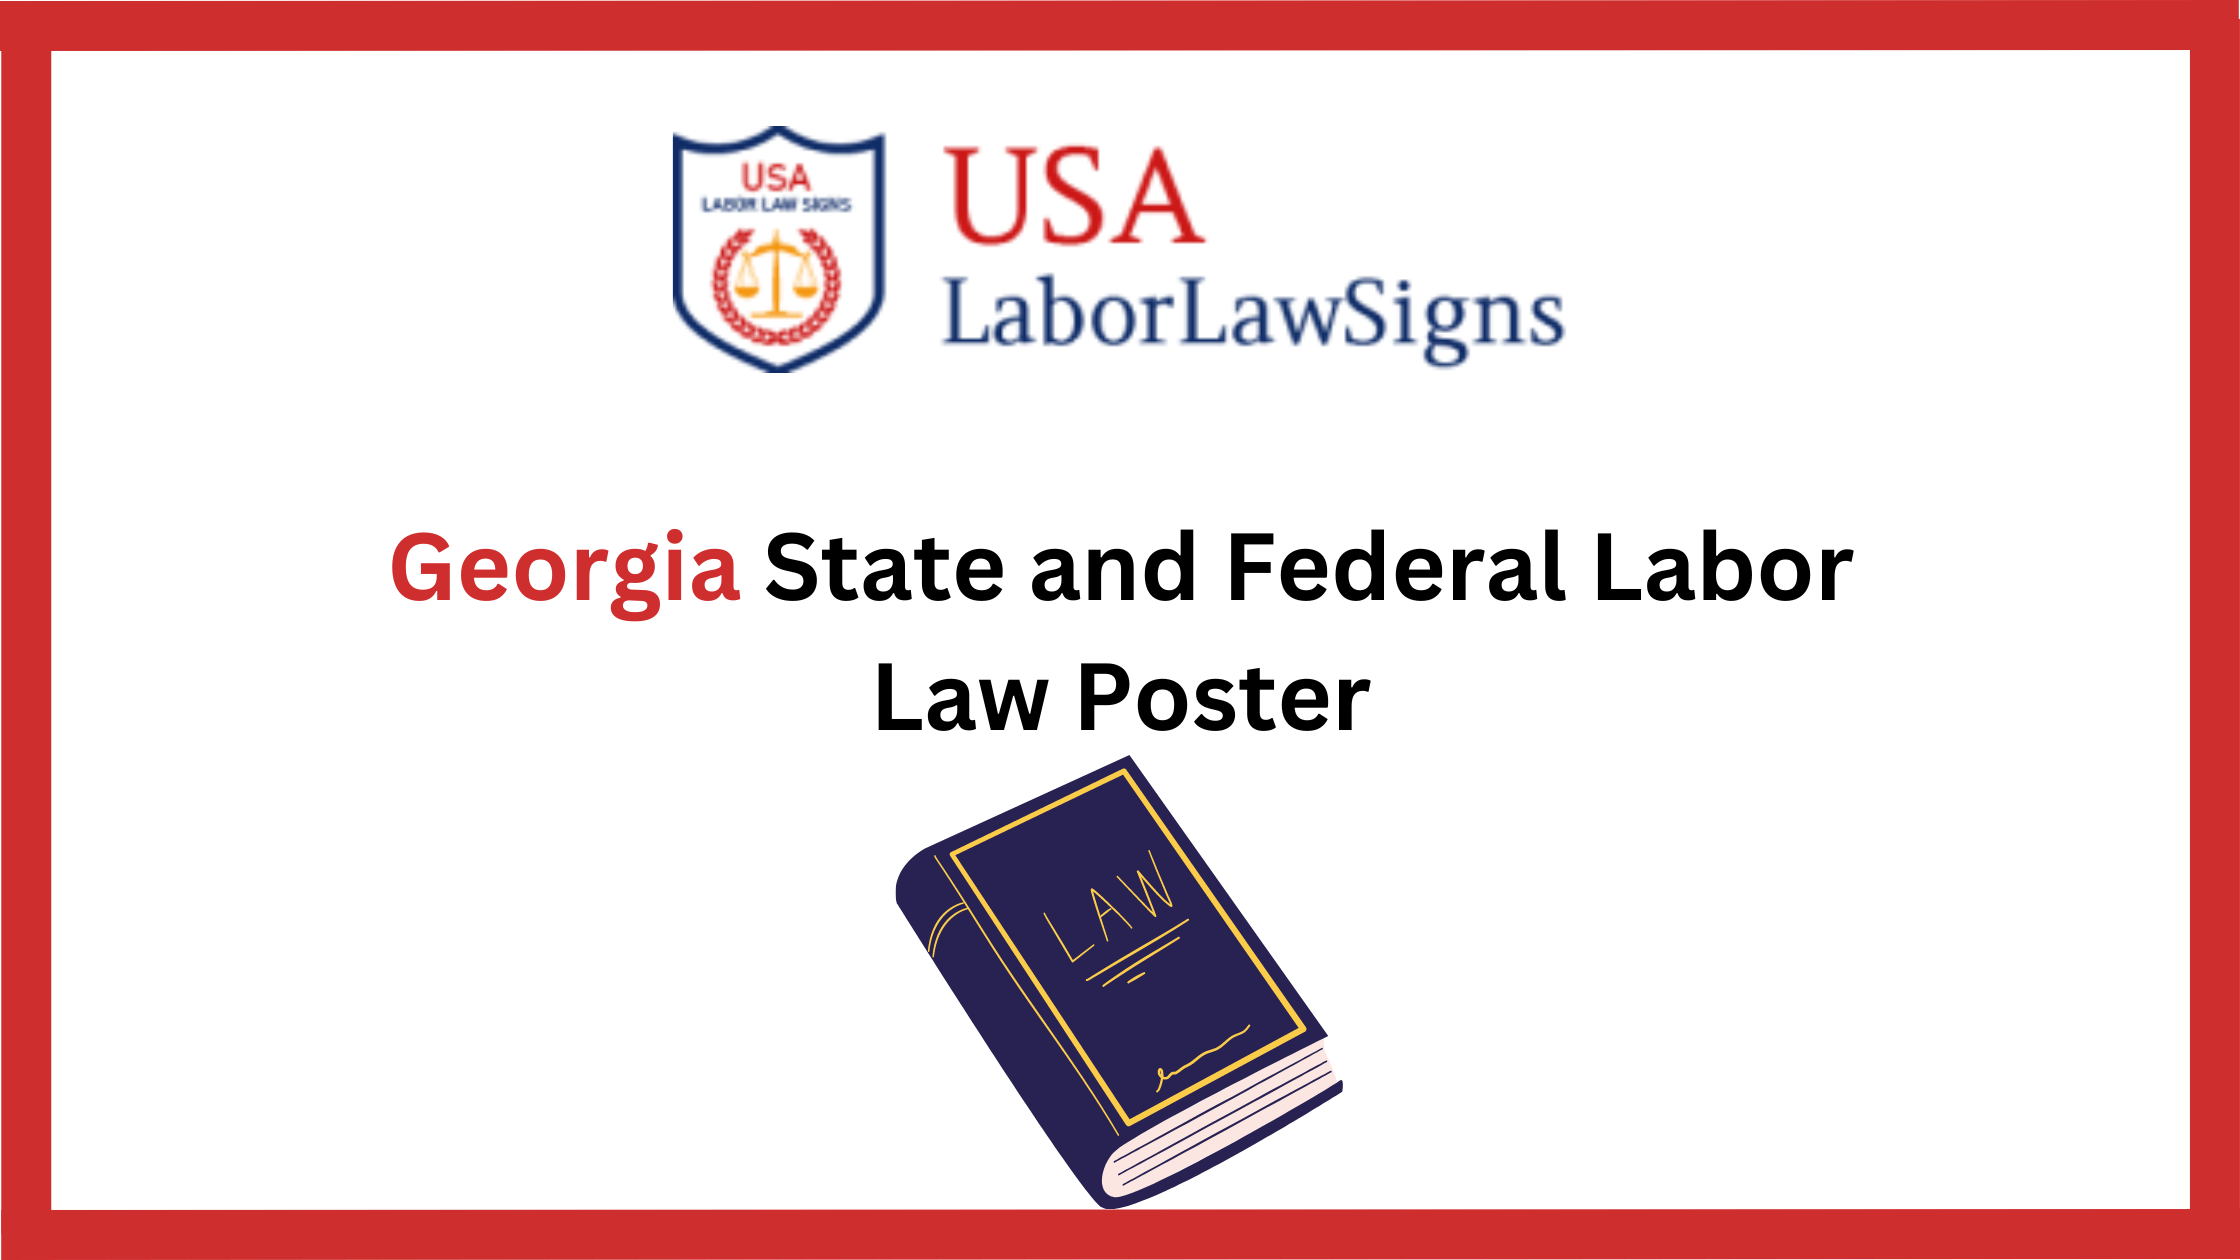 Georgia State and Federal Labor Law Posters